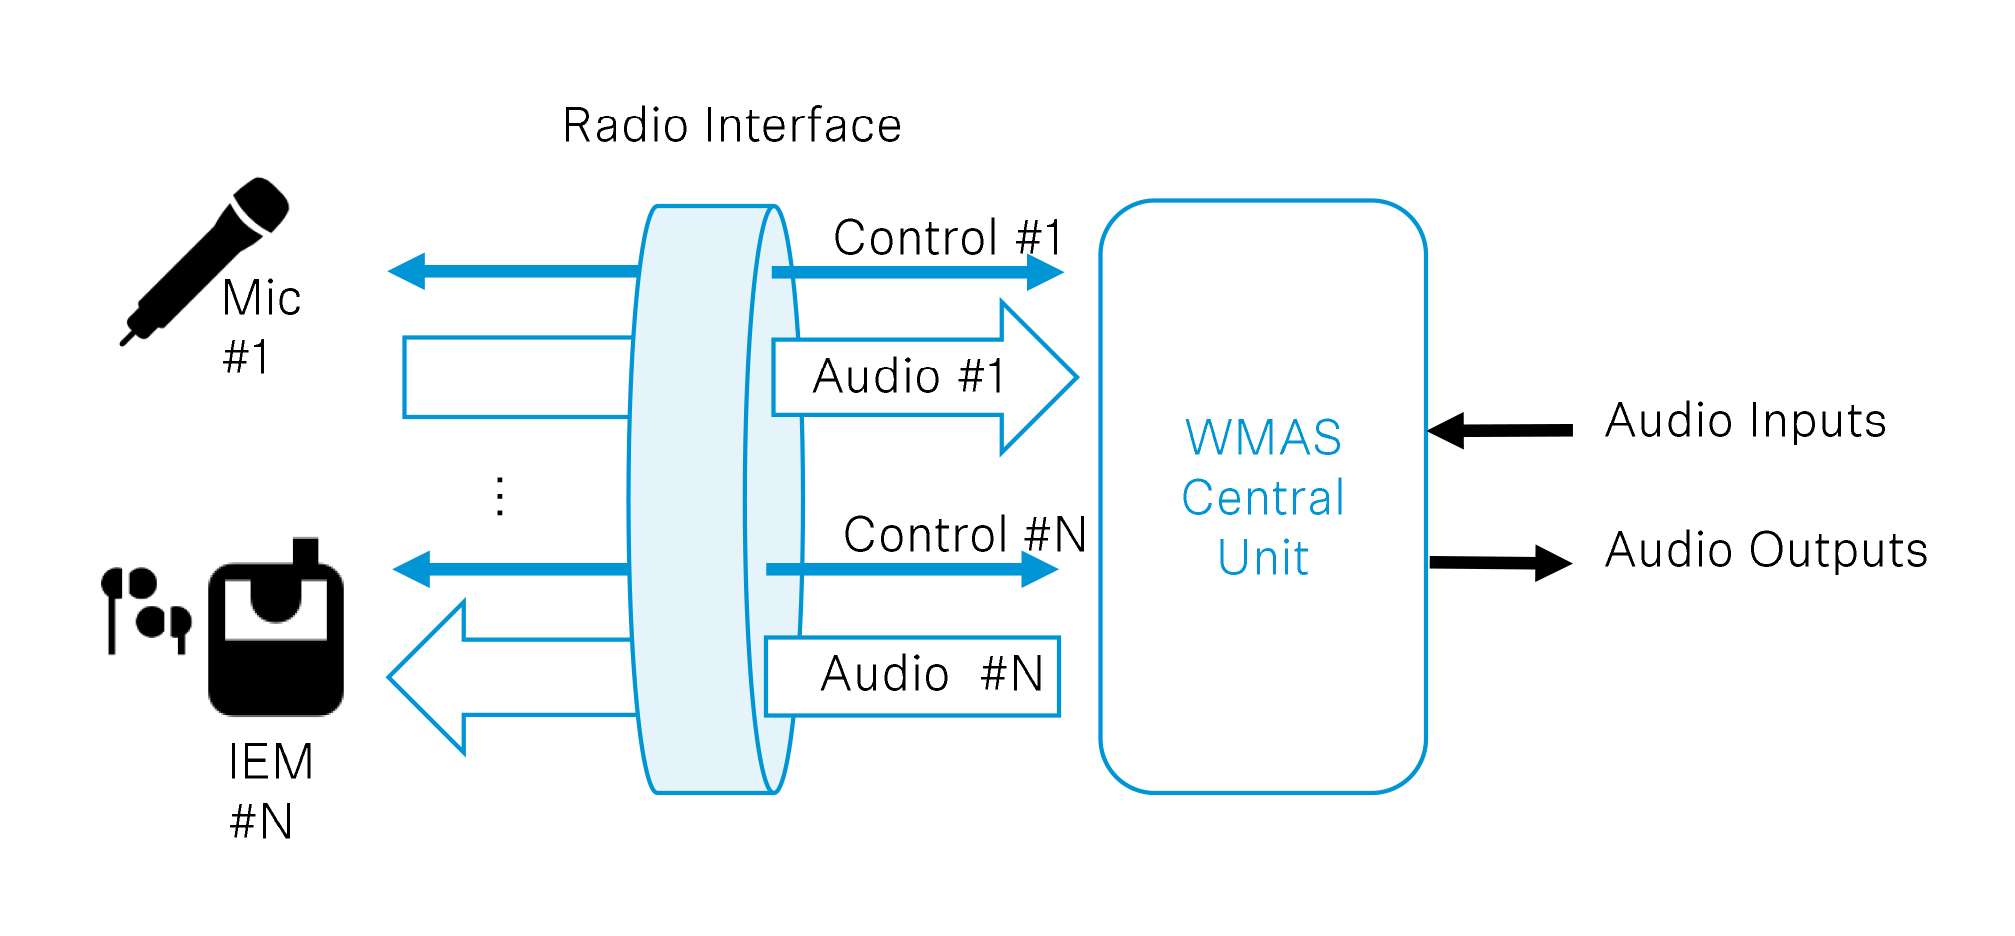 The Sennheiser implementation of WMAS: one central rack-mount unit handles many wireless mics and IEMS simultaneously and in the same RF channel